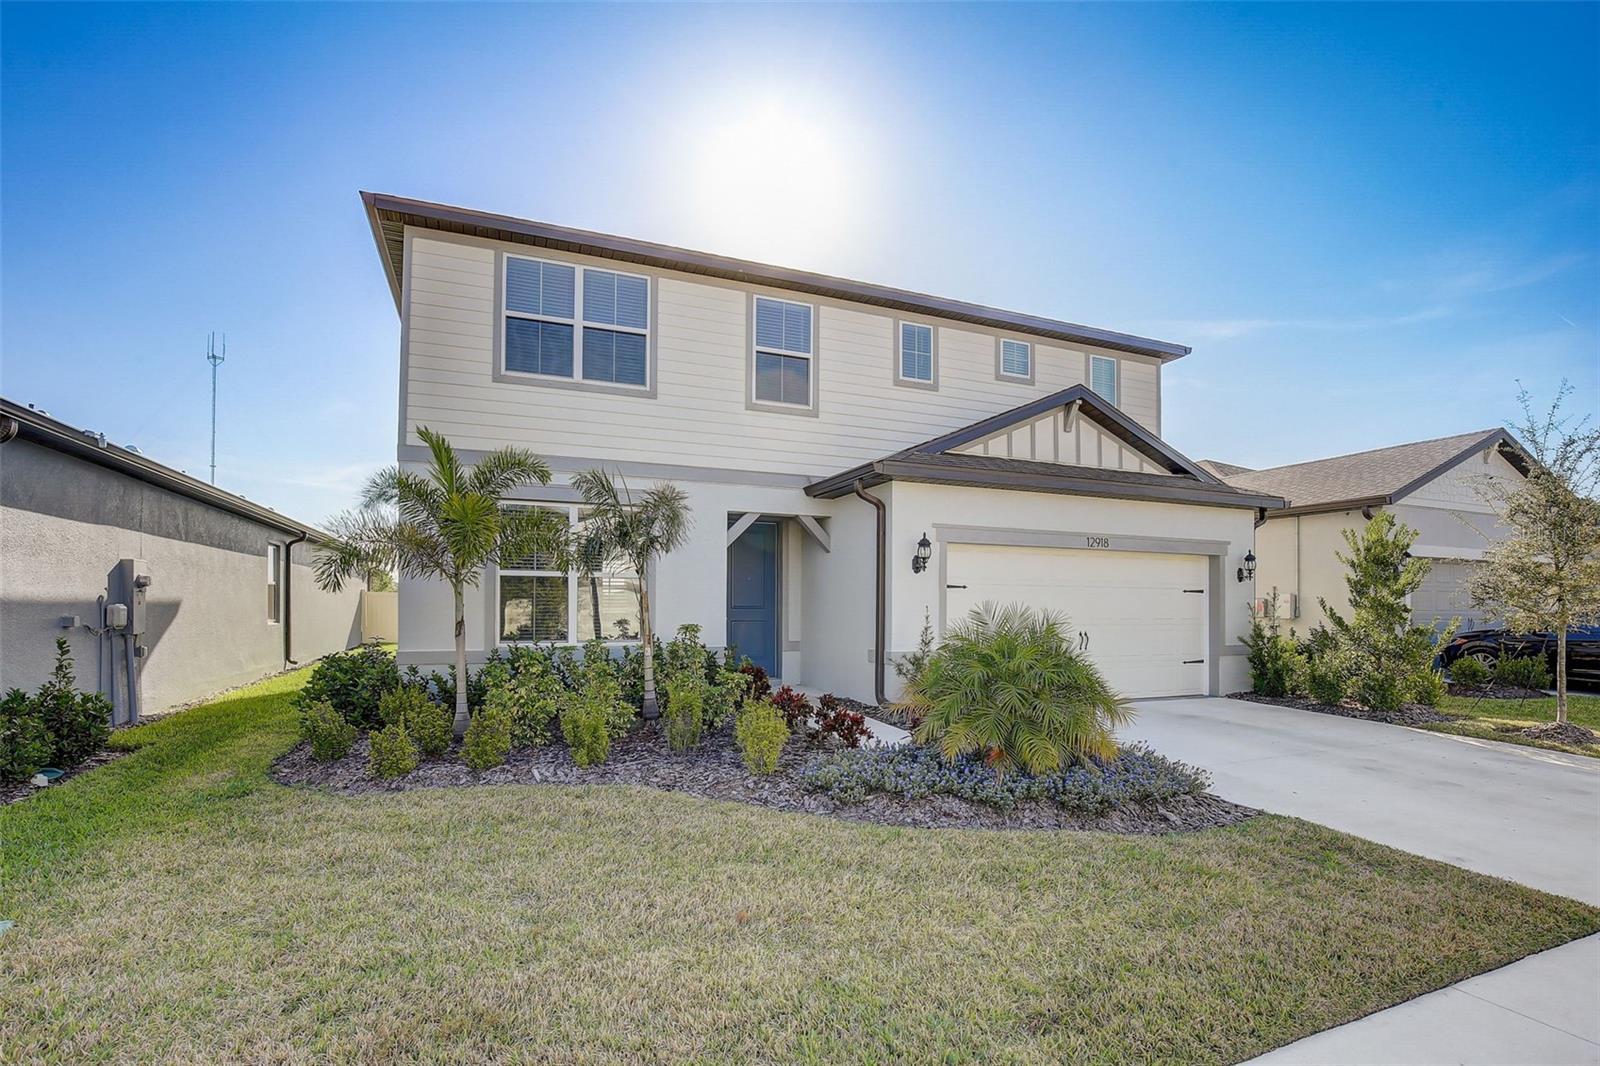 Photo one of 12918 Brookside Moss Dr Riverview FL 33579 | MLS T3509565